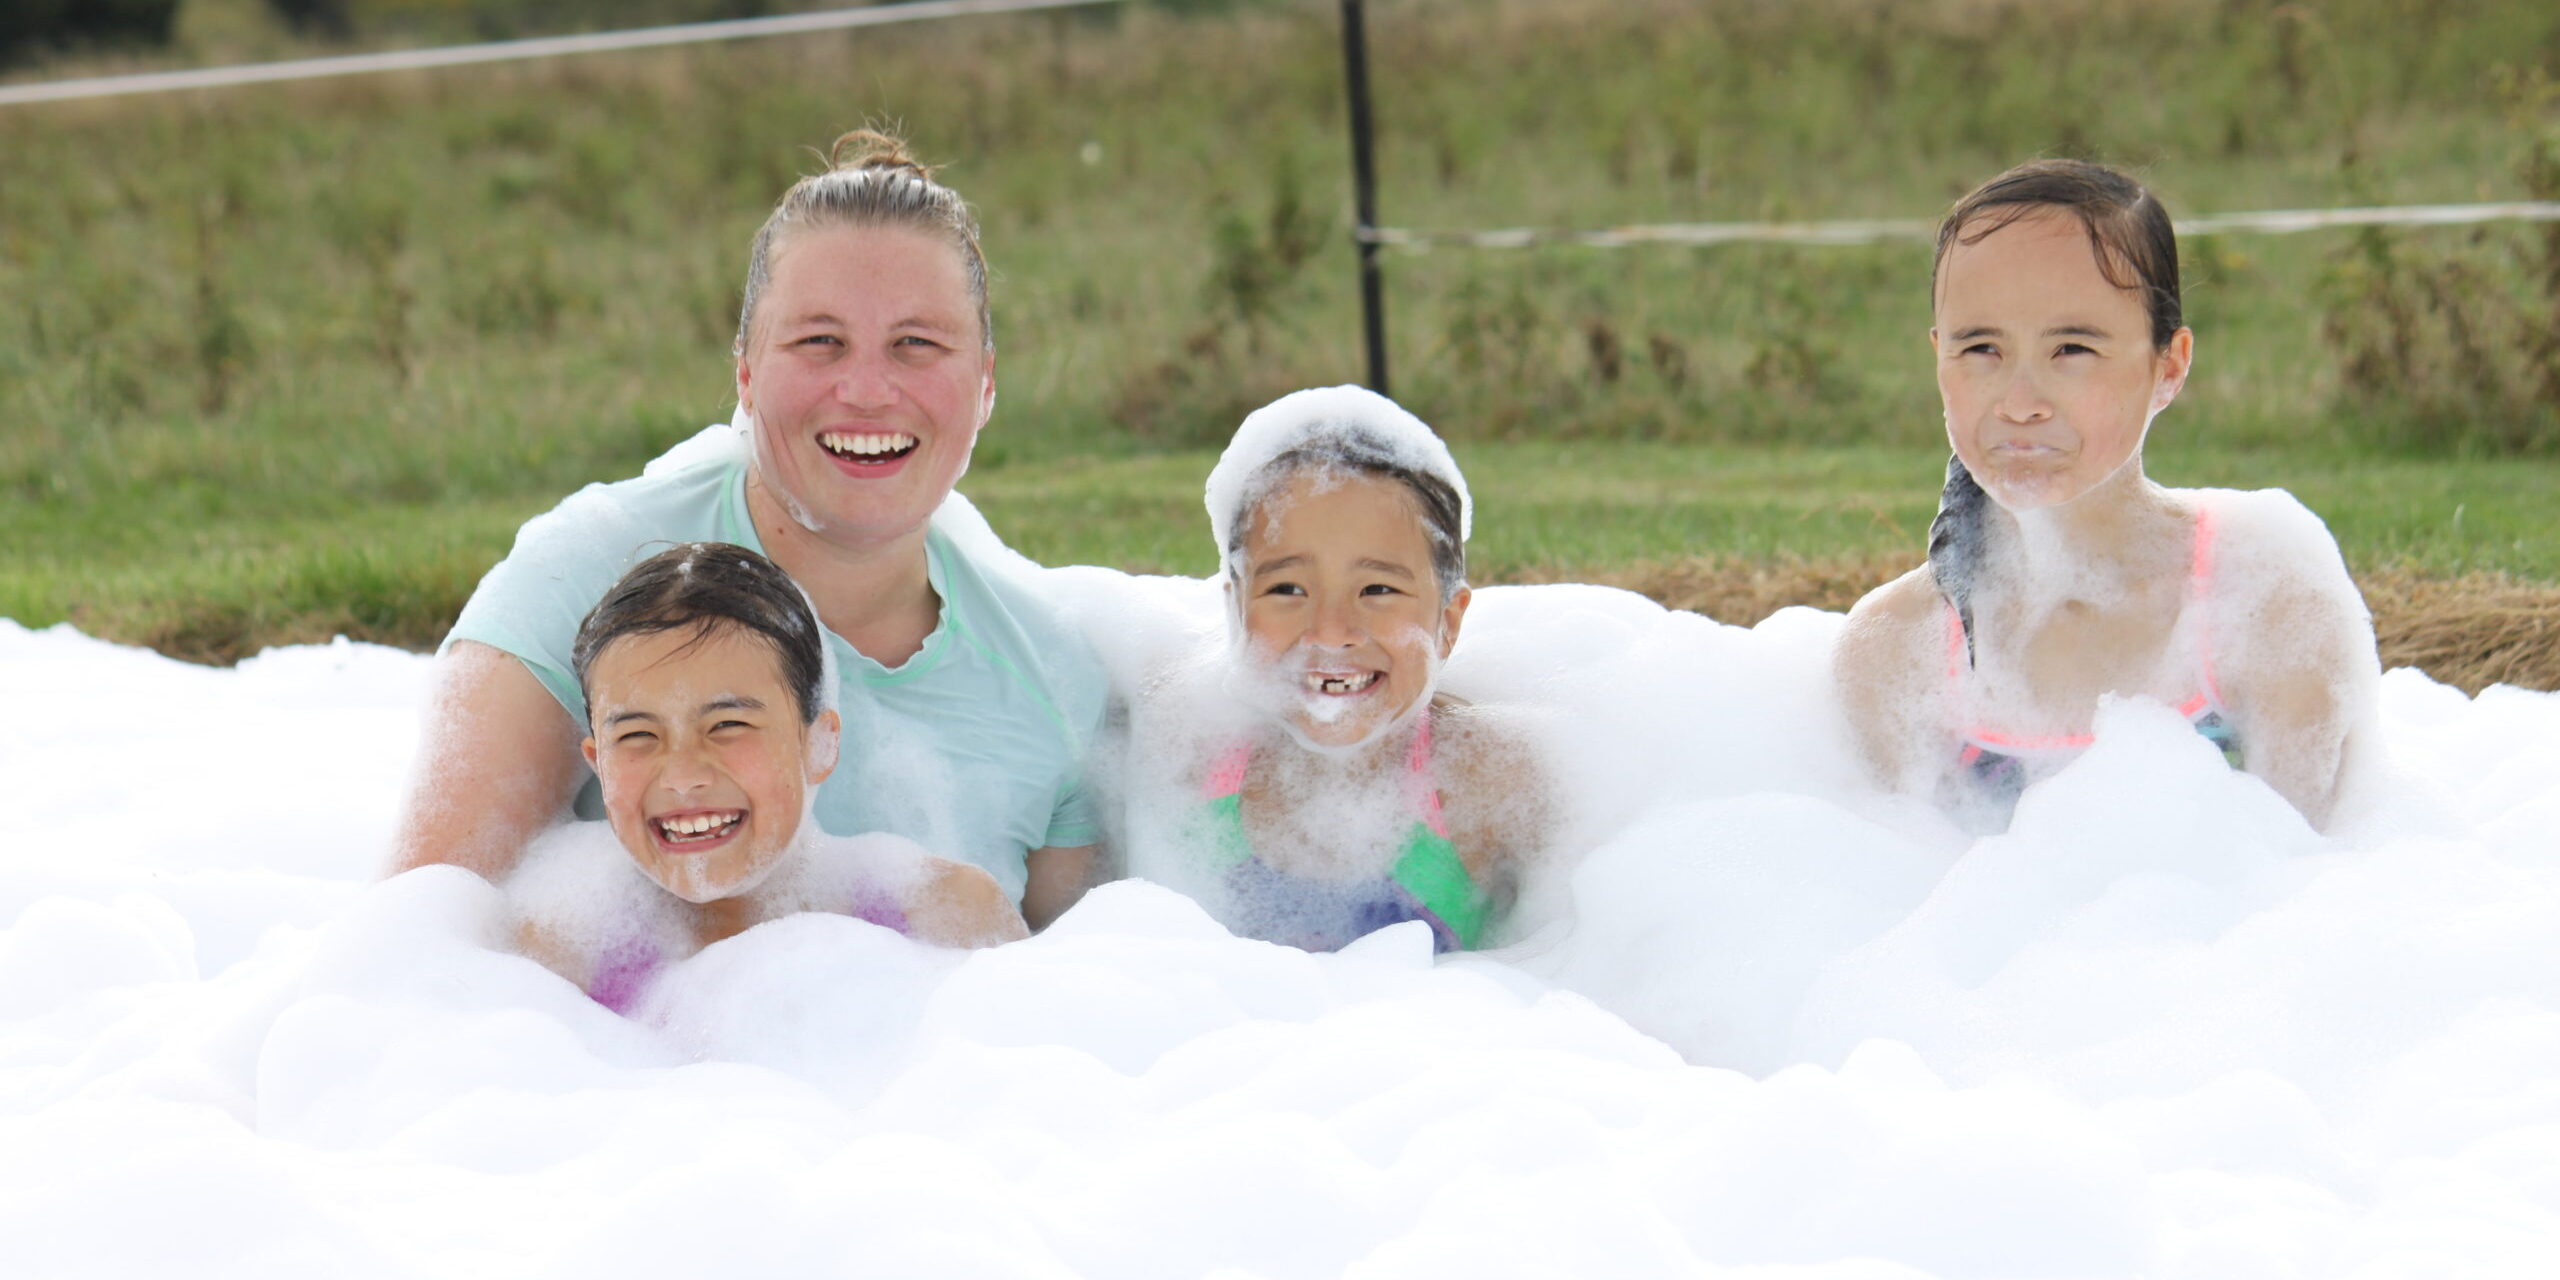 Four people sitting in a large pile of bubbles laughing